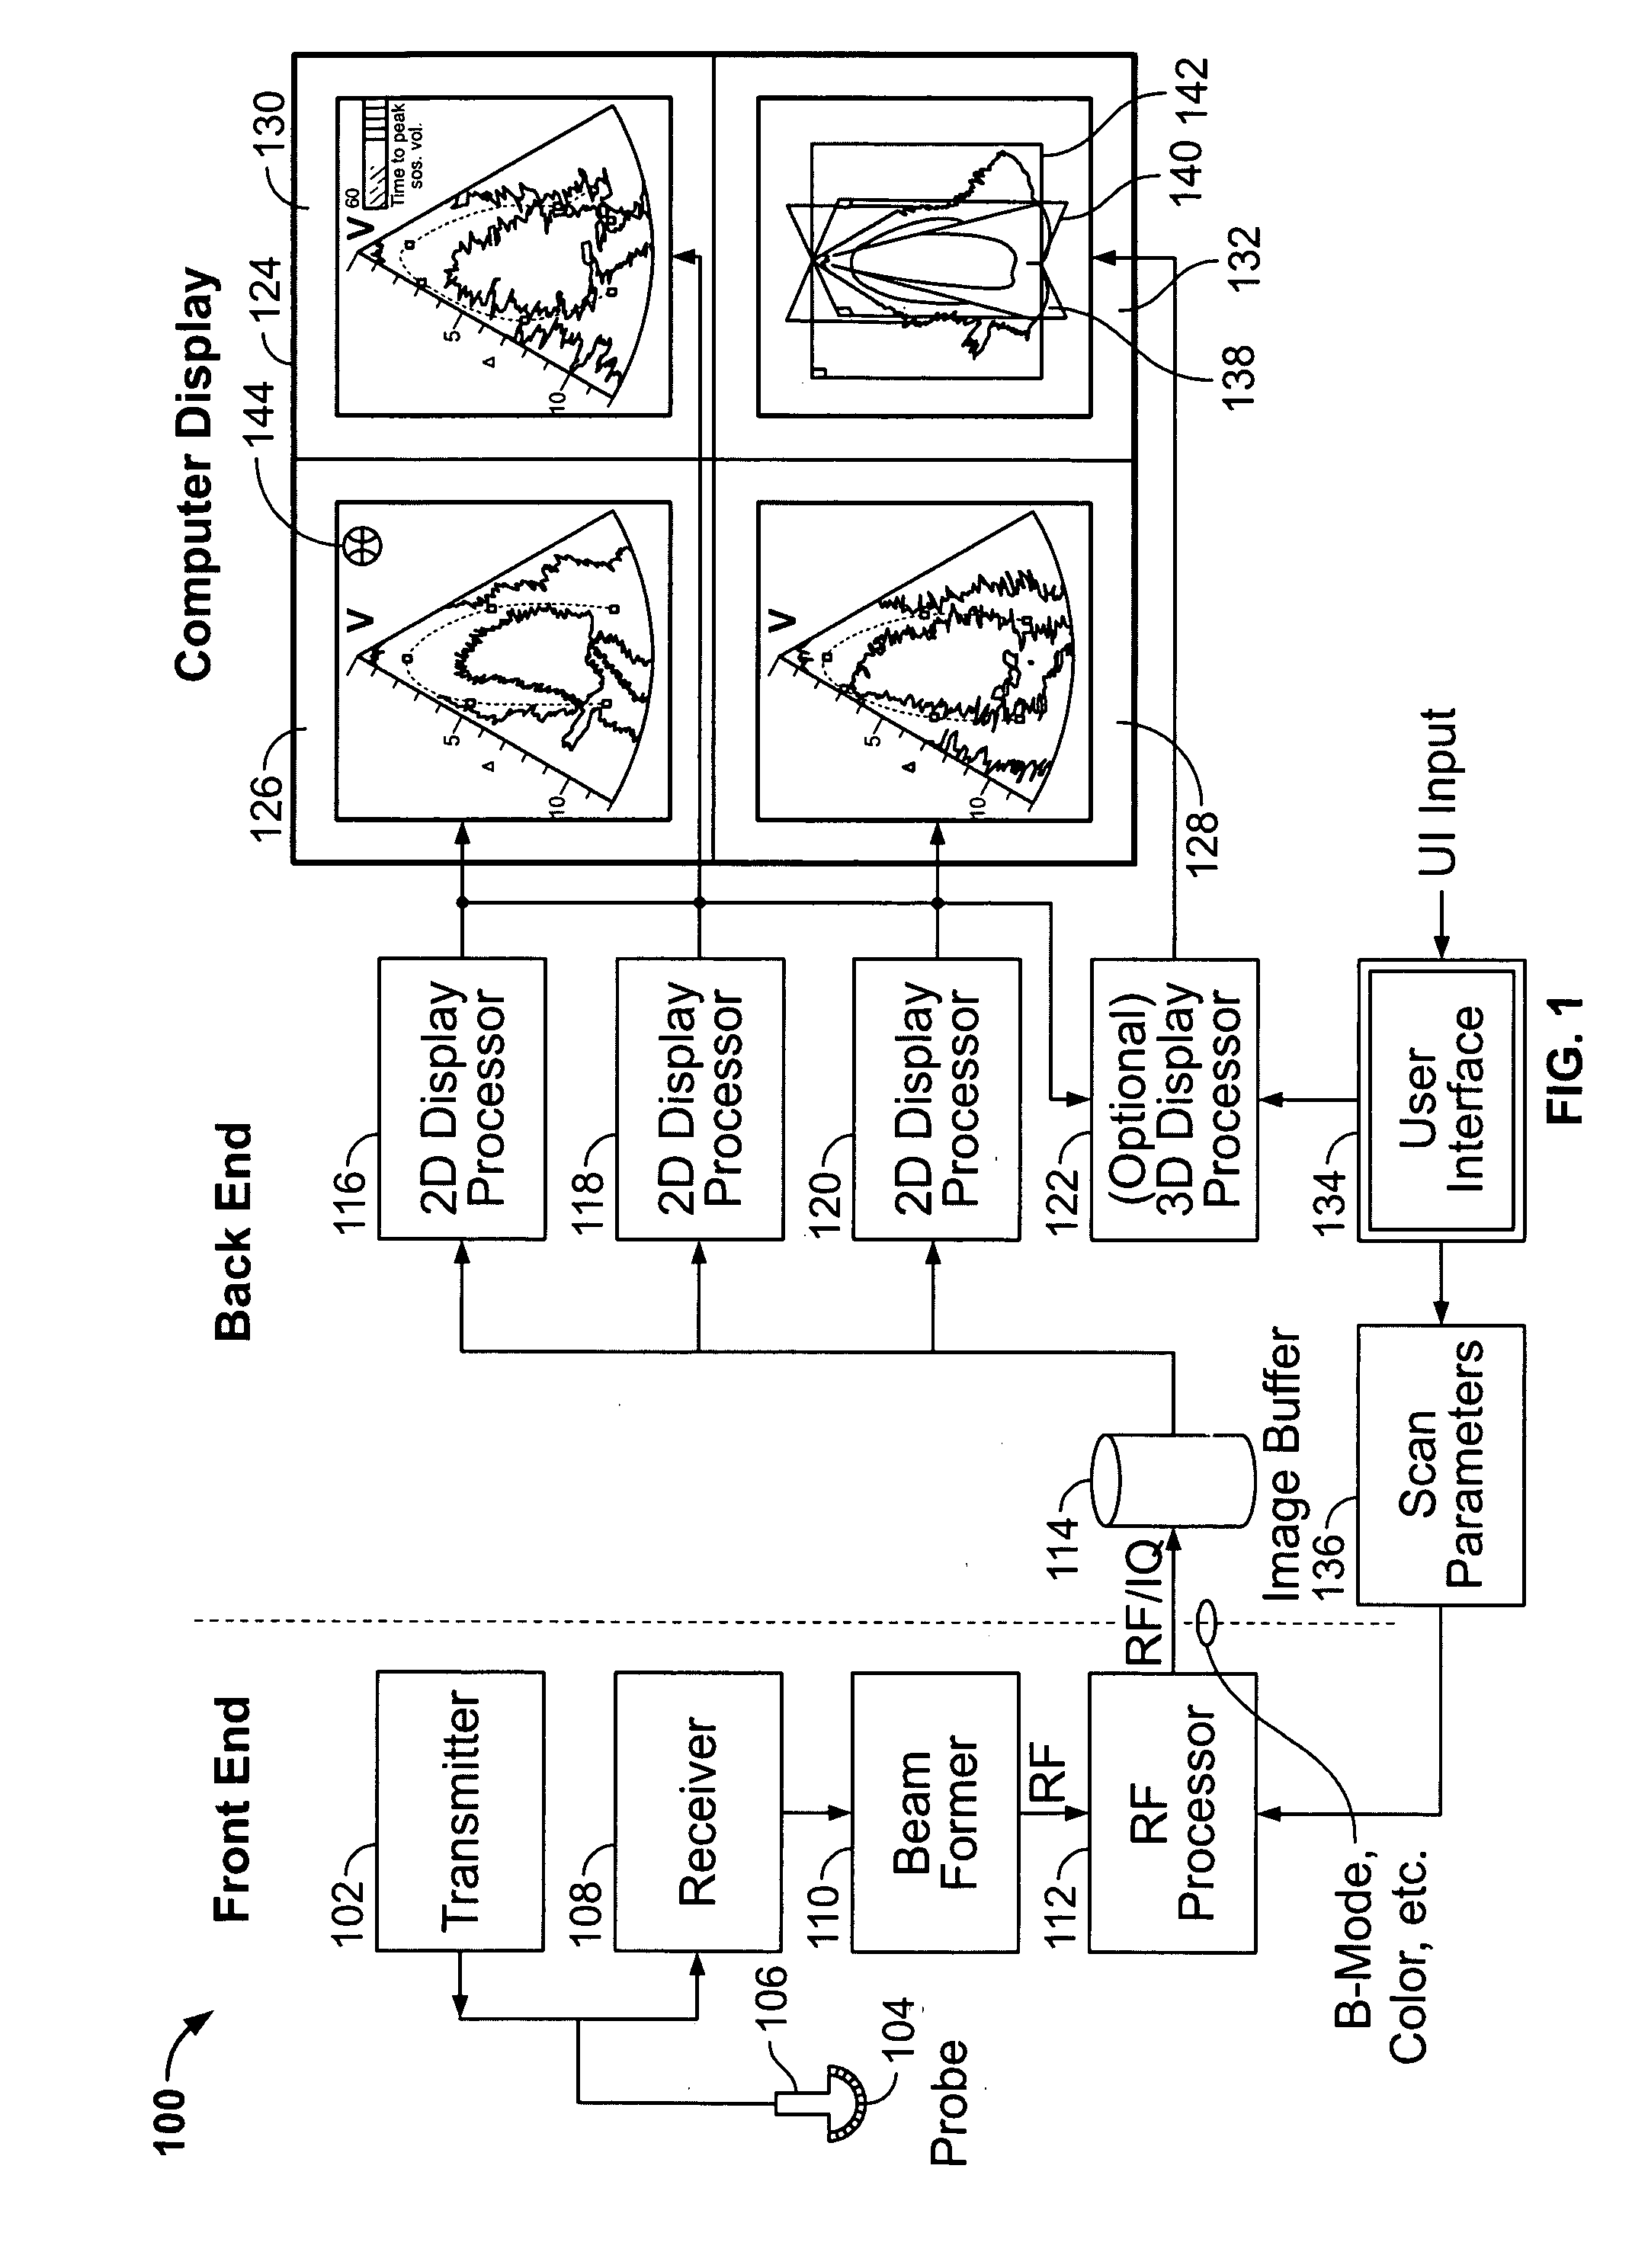 Method and apparatus for real time ultrasound multi-plane imaging